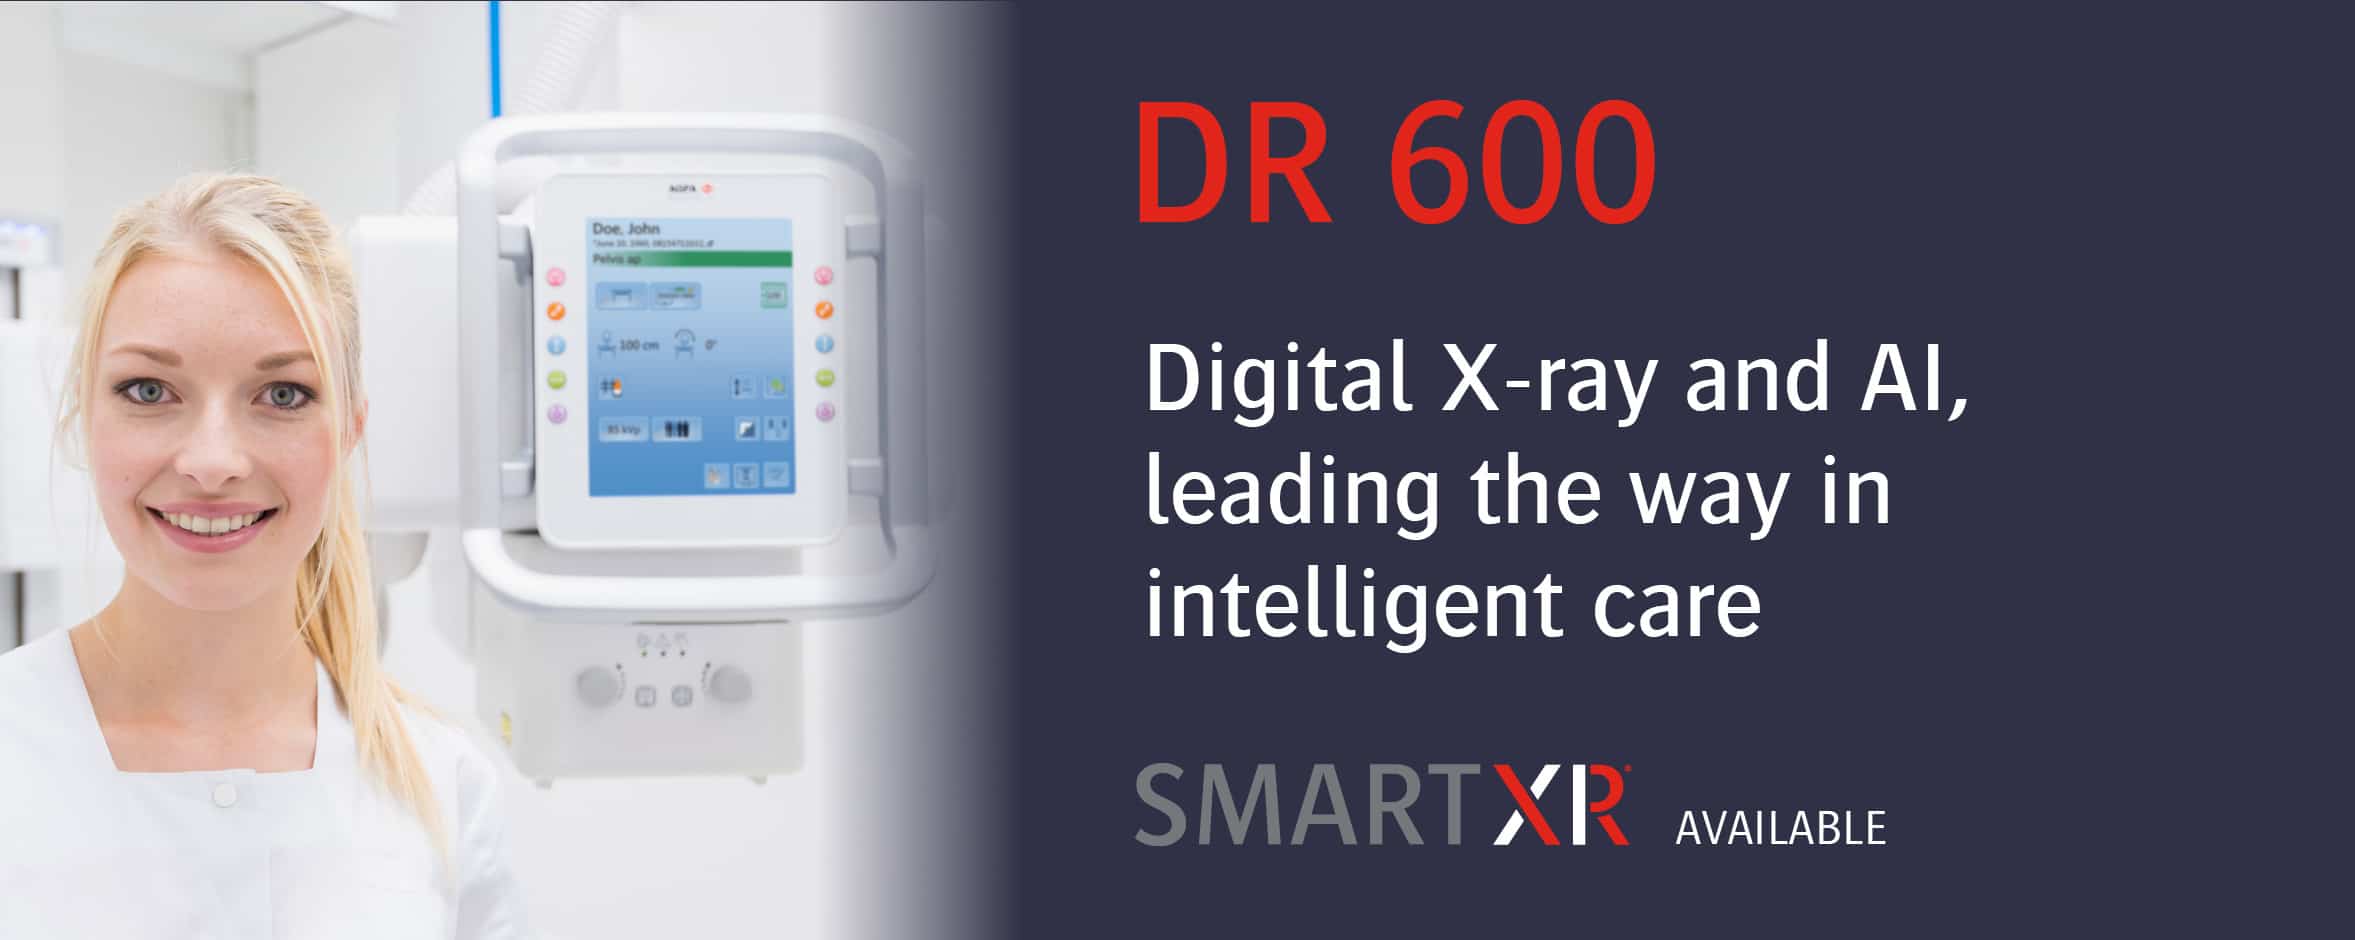 DR 600 Digital X-ray and AI, leading the way in intelligent care